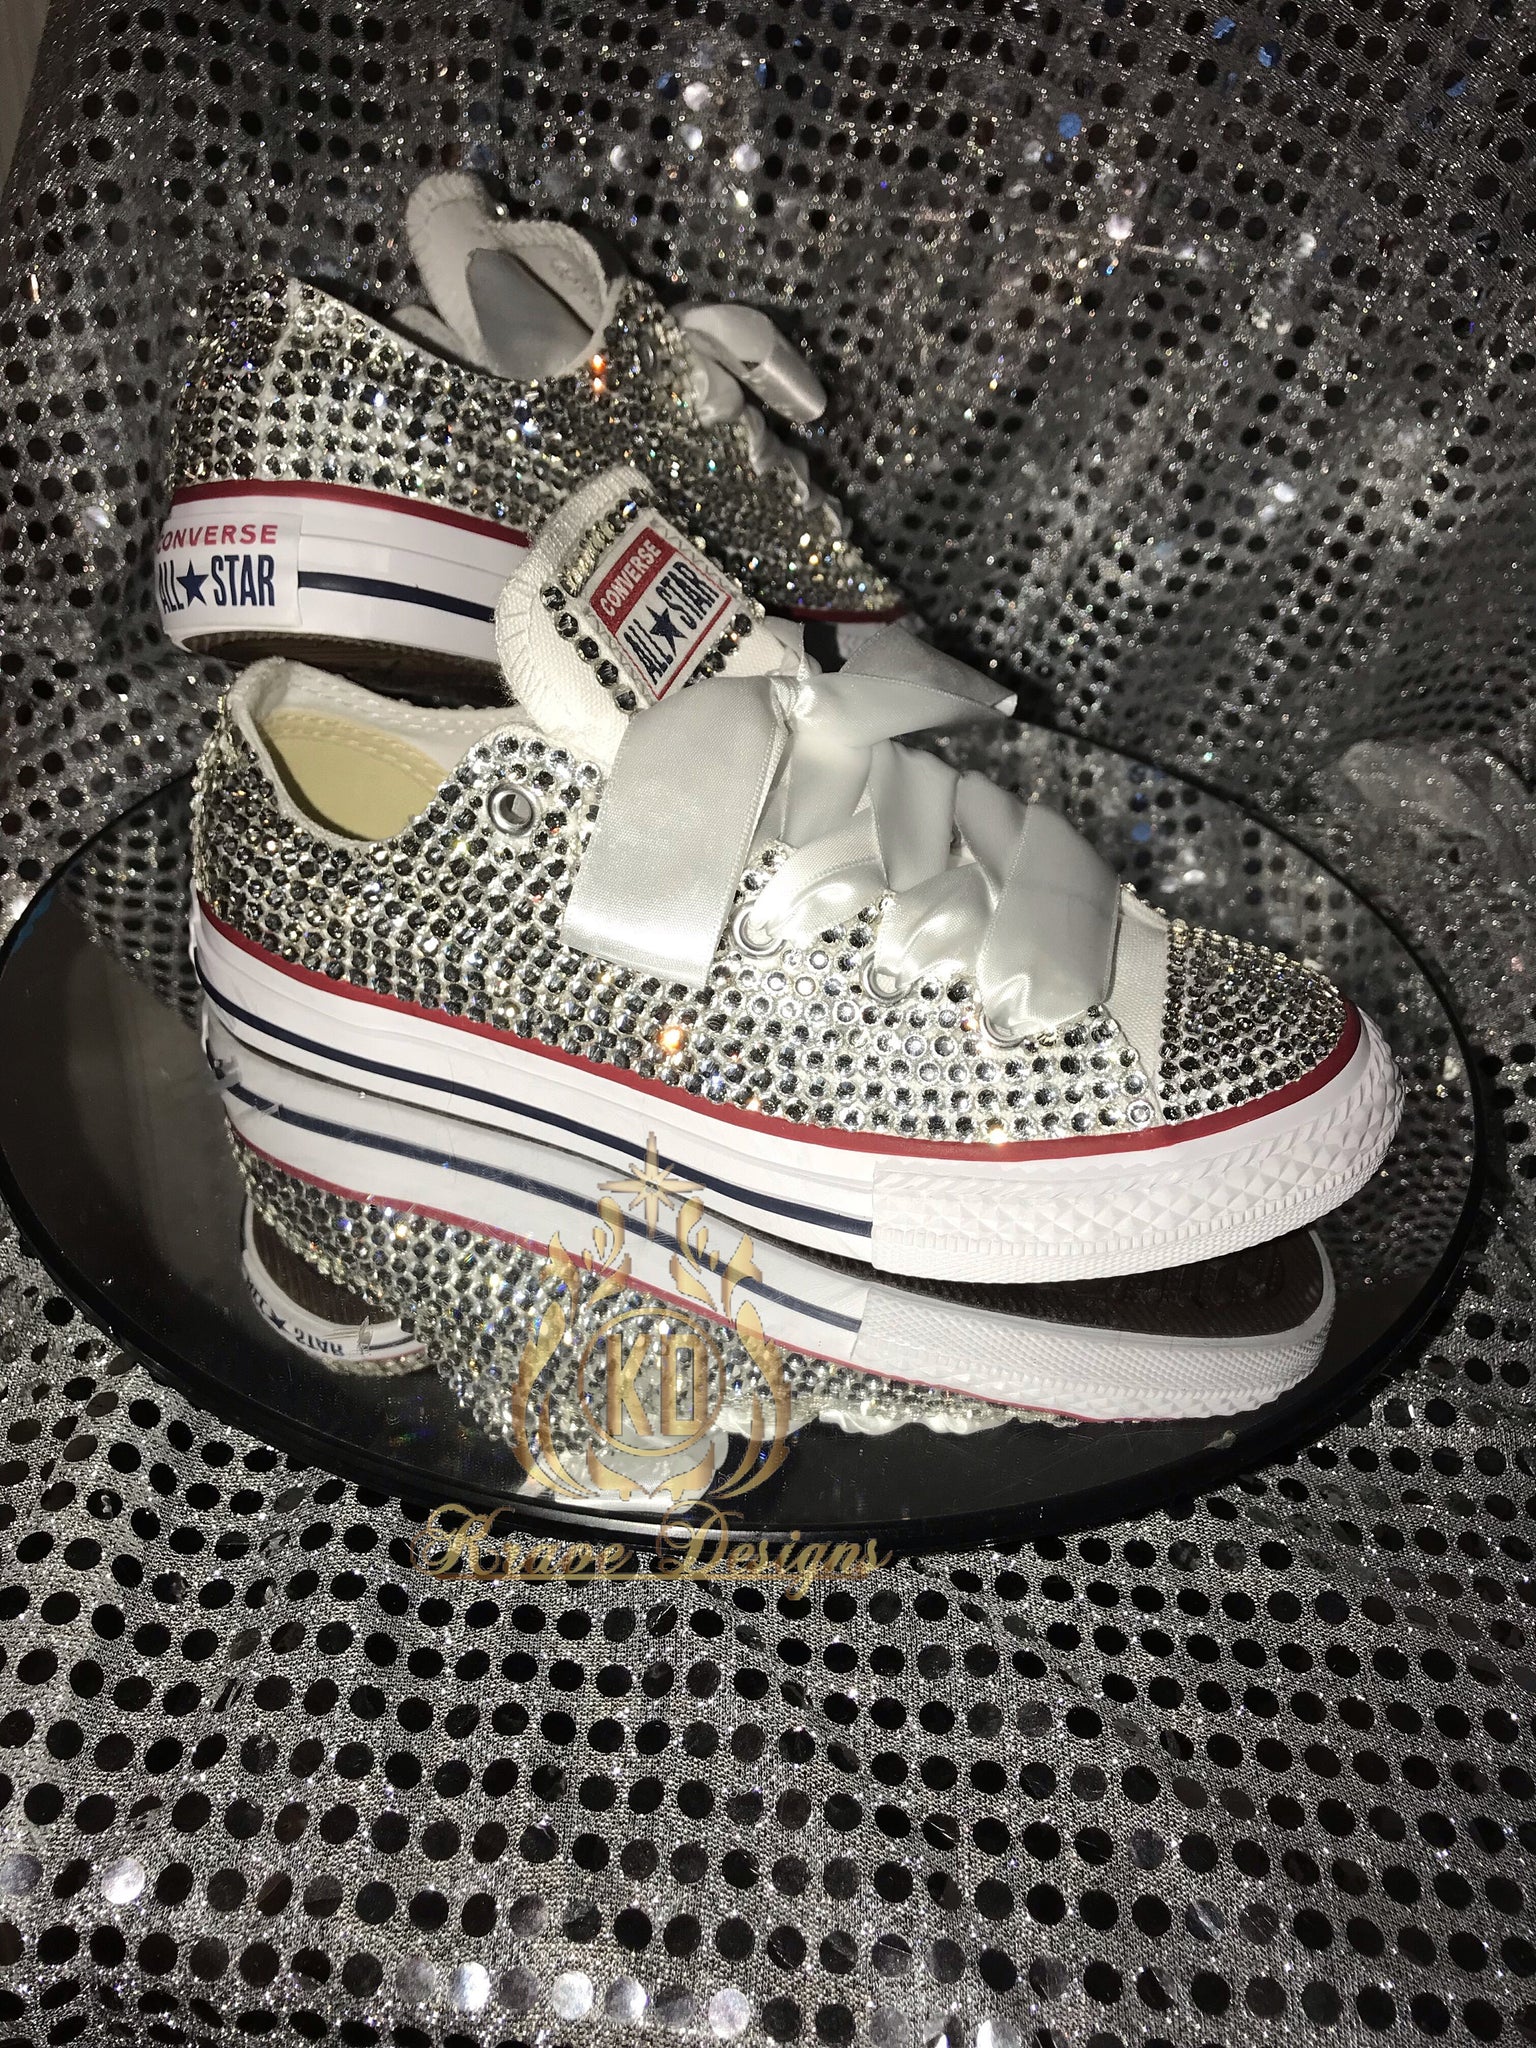 Converse All Star Chuck Taylor White Bedazzled Pearl Bling Sneakers Size 6